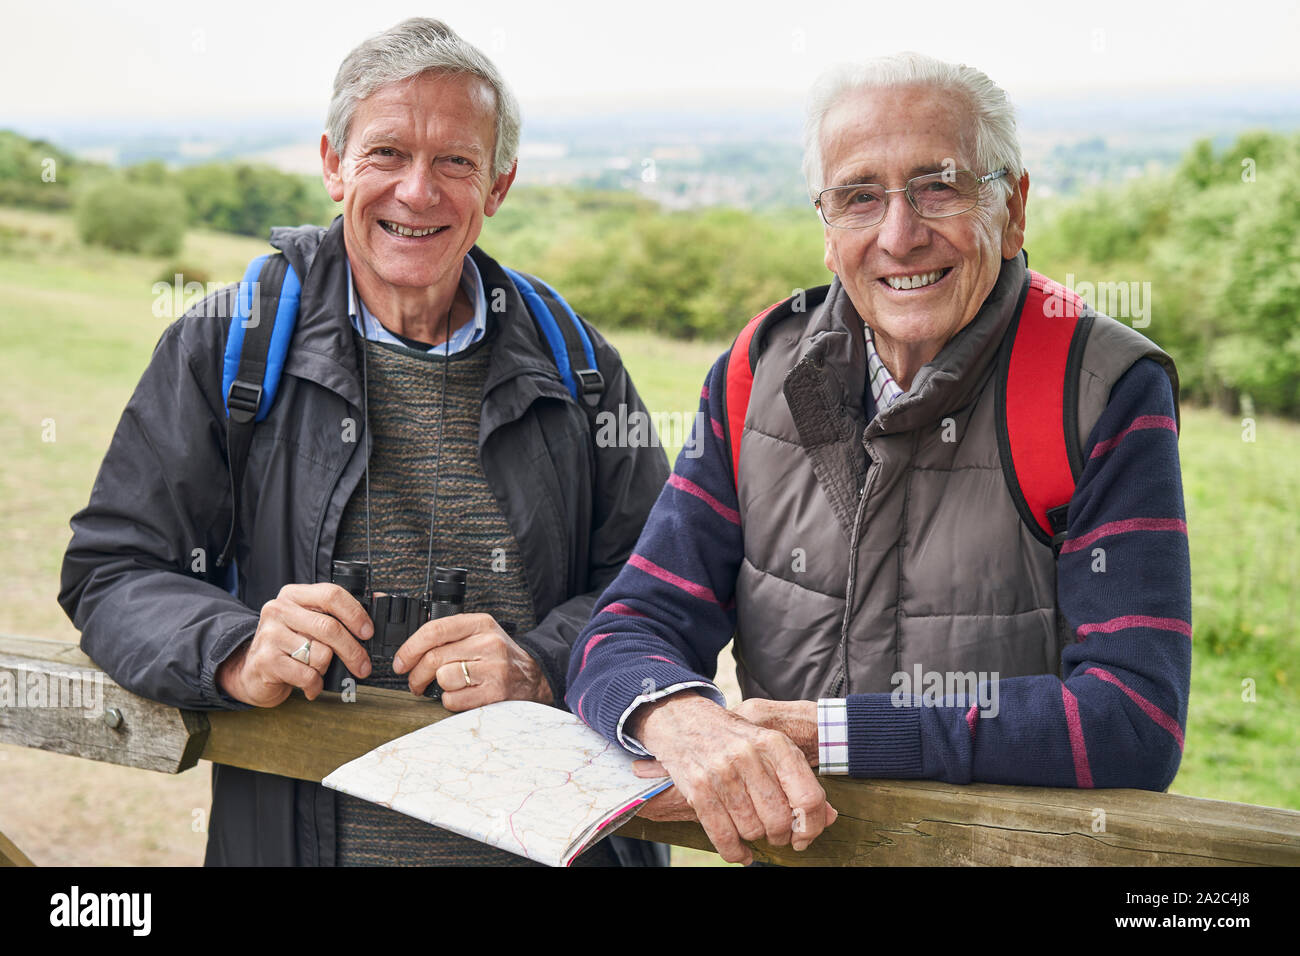 Portrait Of Two Retired Male Friends On Walking Holiday Resting On Gate With Map Stock Photo